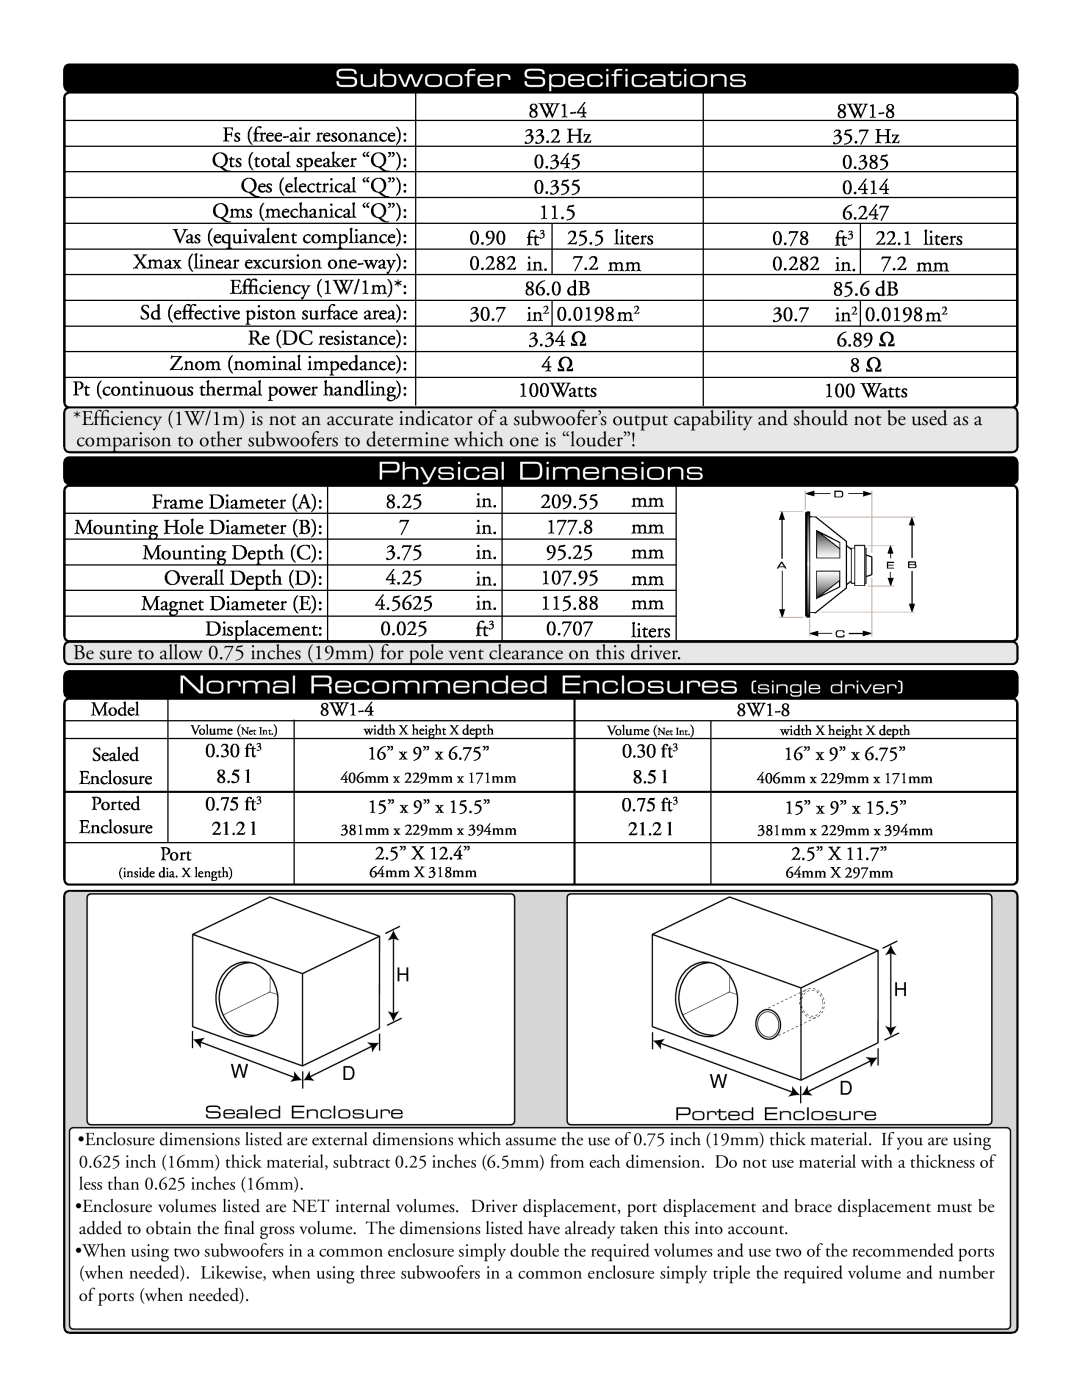 JL Audio Subwoofe dimensions Physical Dimensions, Normal Recommended Enclosures single driver 